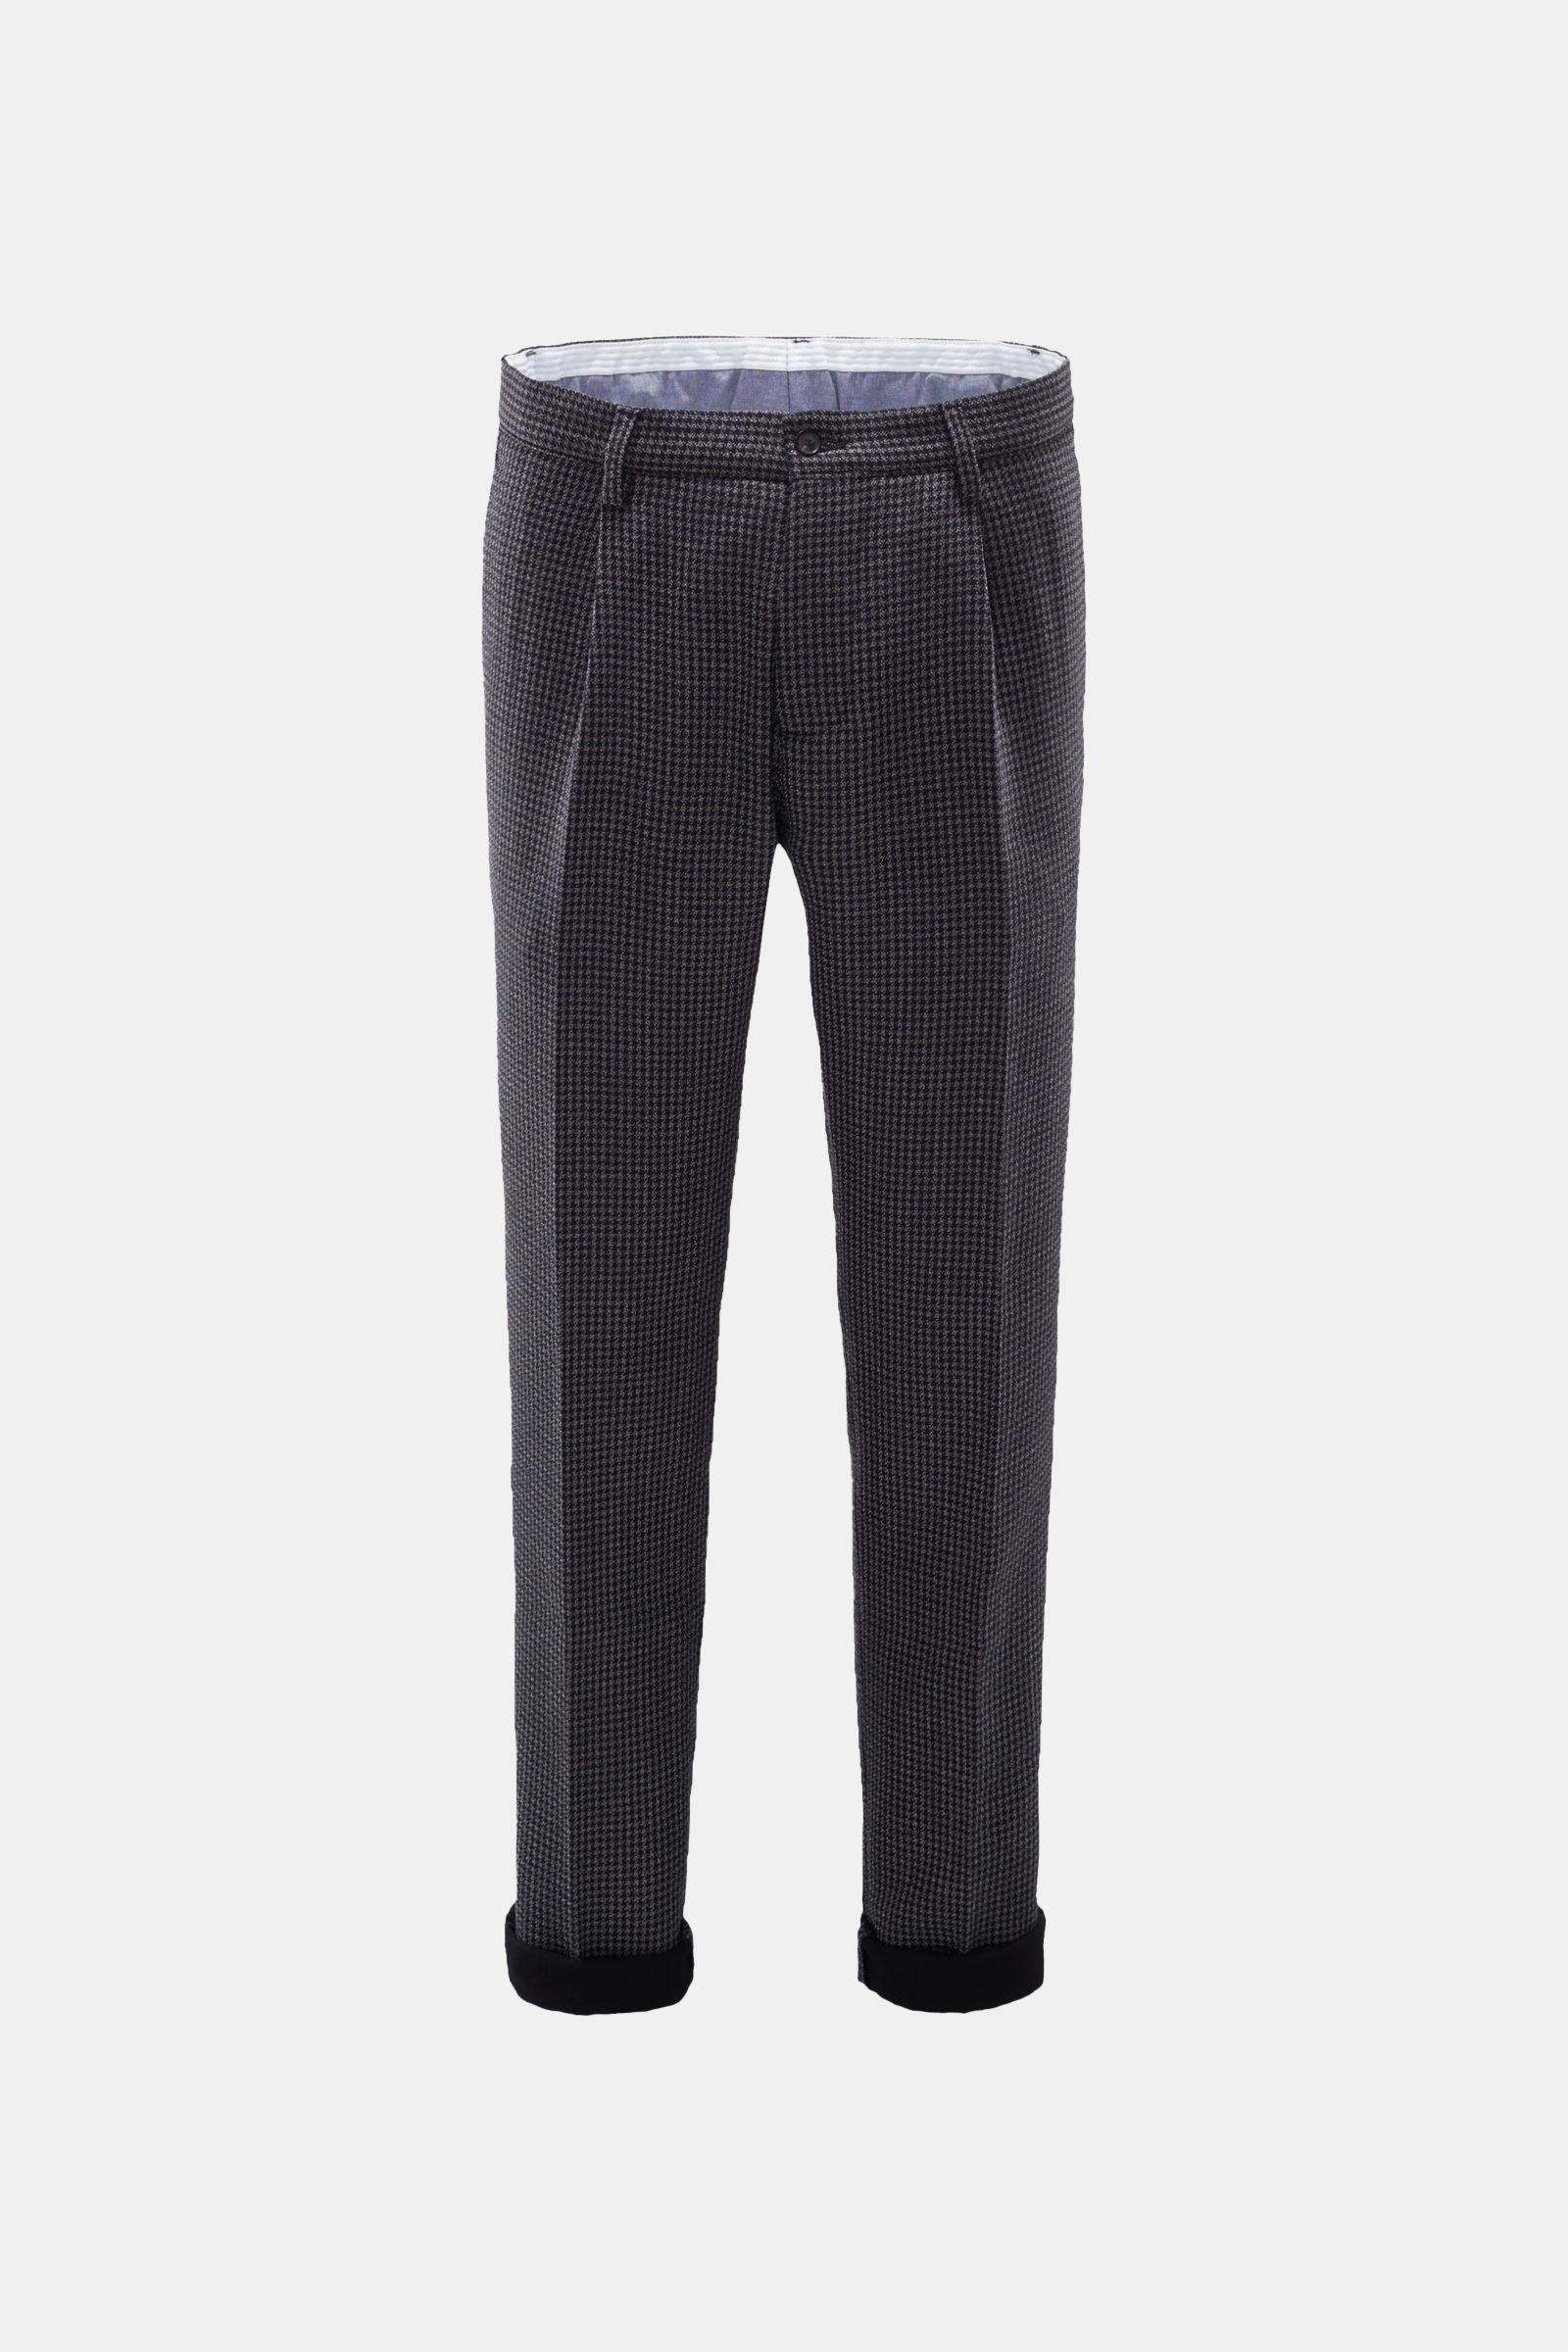 Trousers 'Aantioco' navy patterned